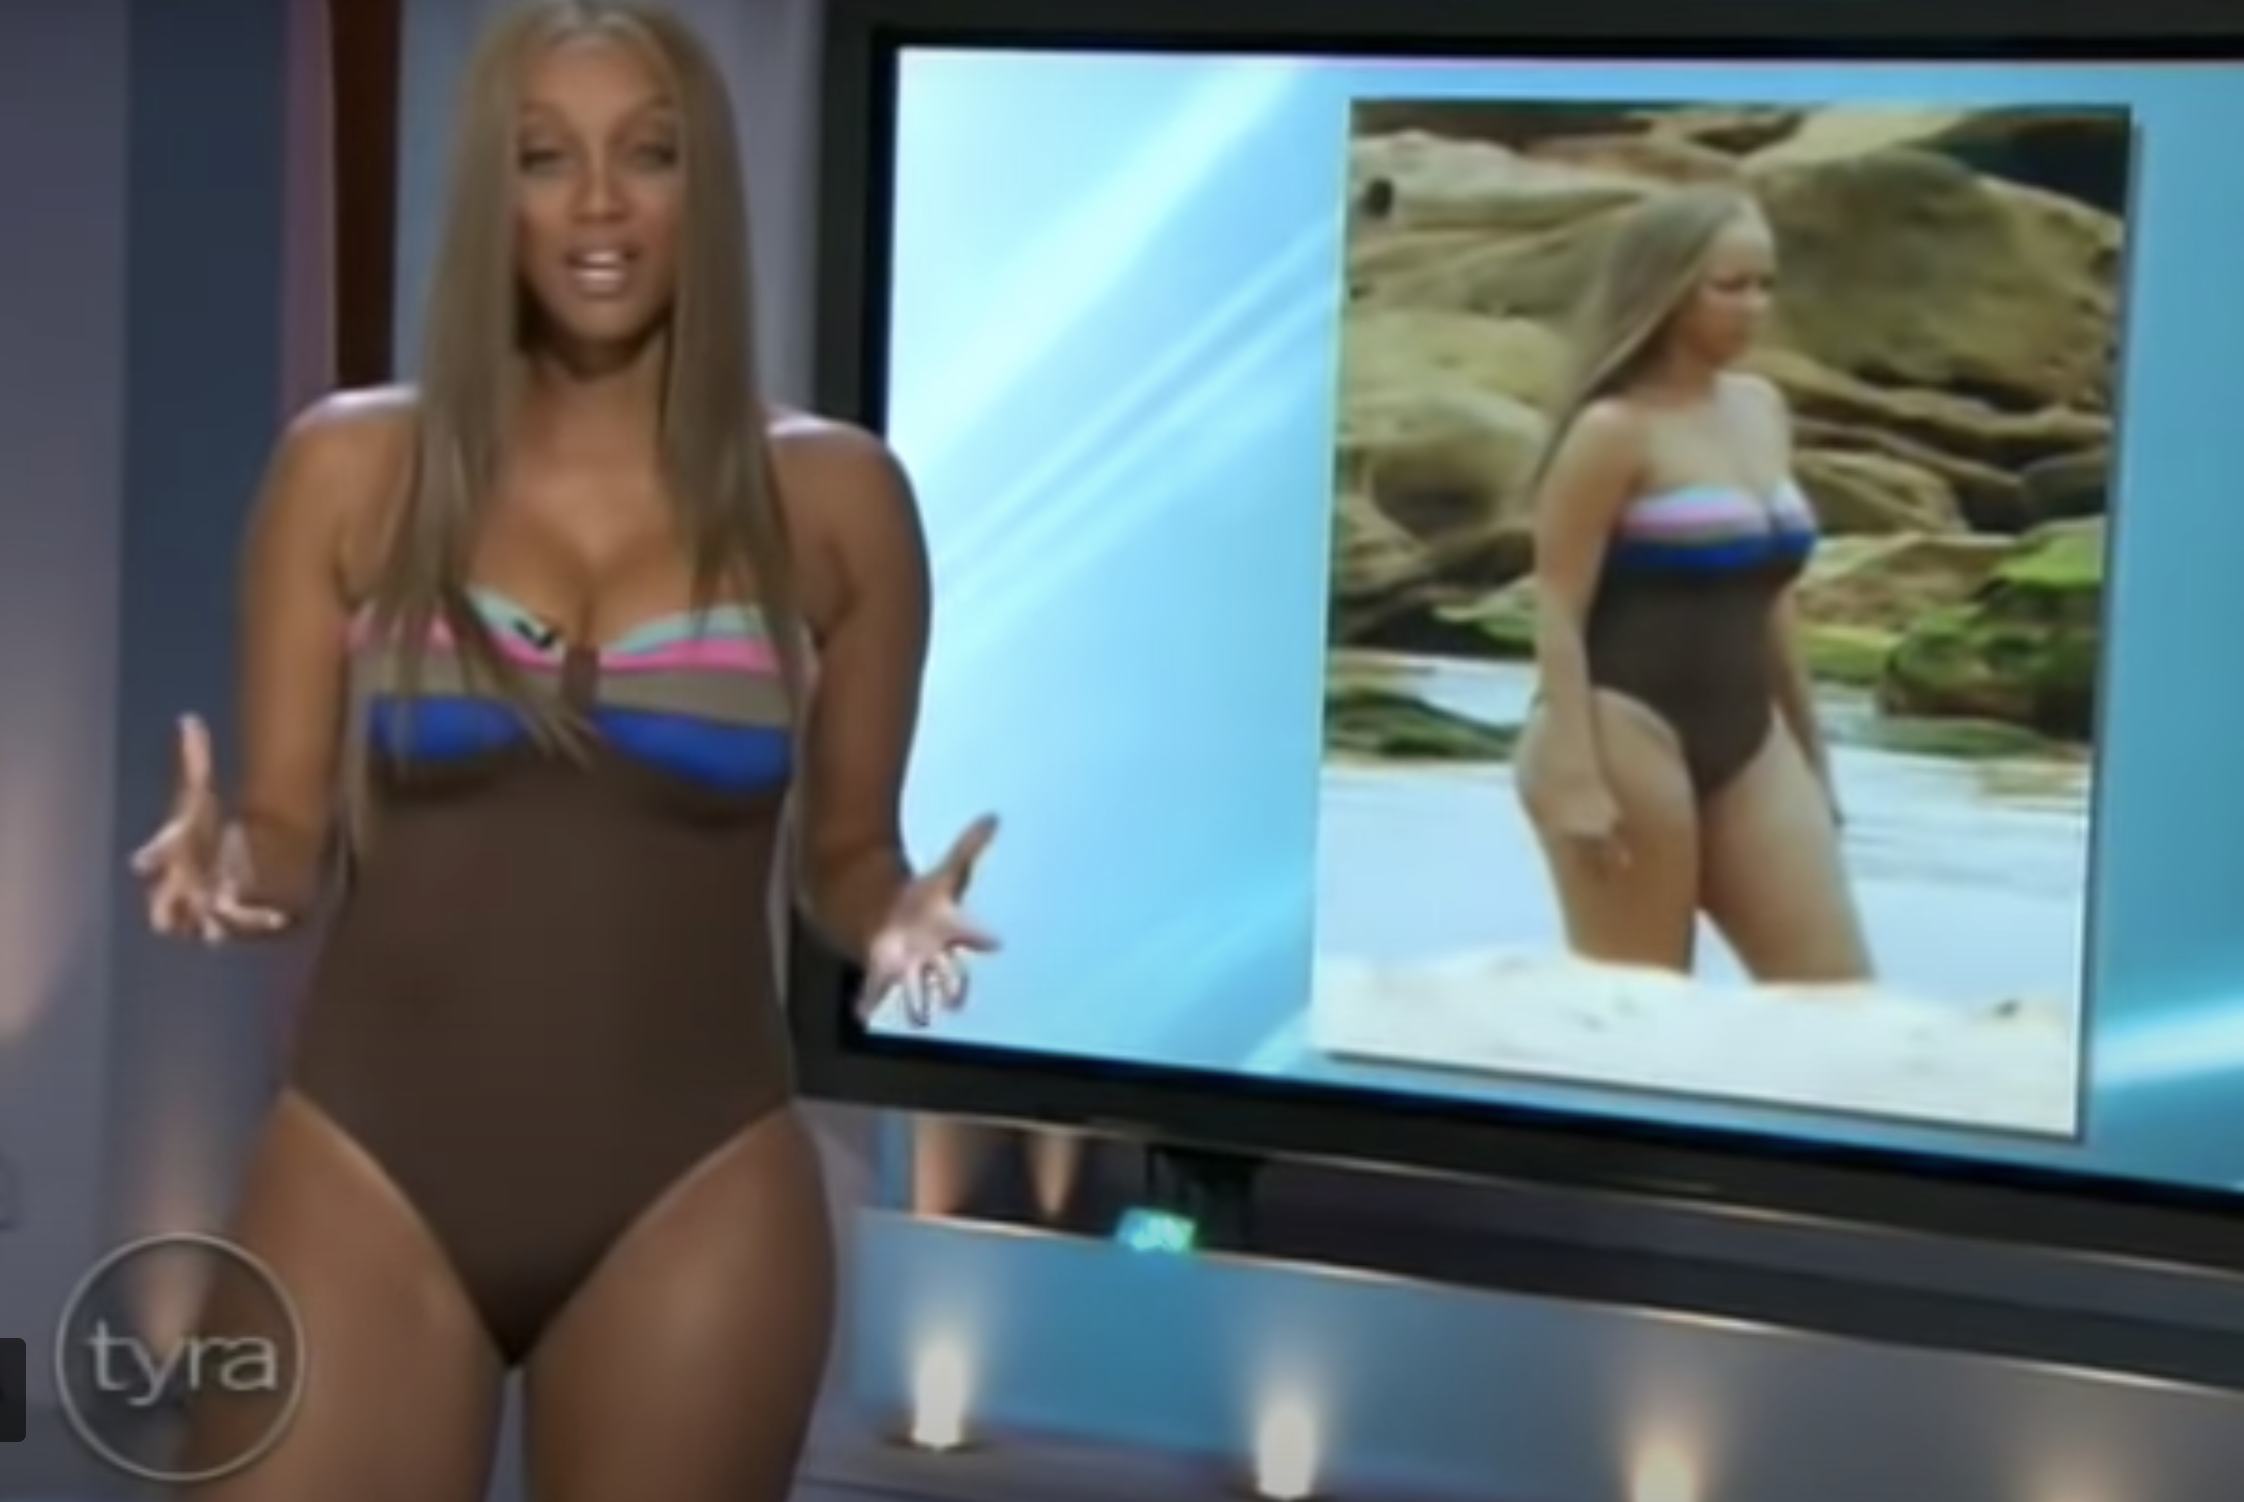 Tyra Banks wearing a bathing suit and talking on her show, with a picture of her in the same bathing suit at an unflattering angle on the screen behind her